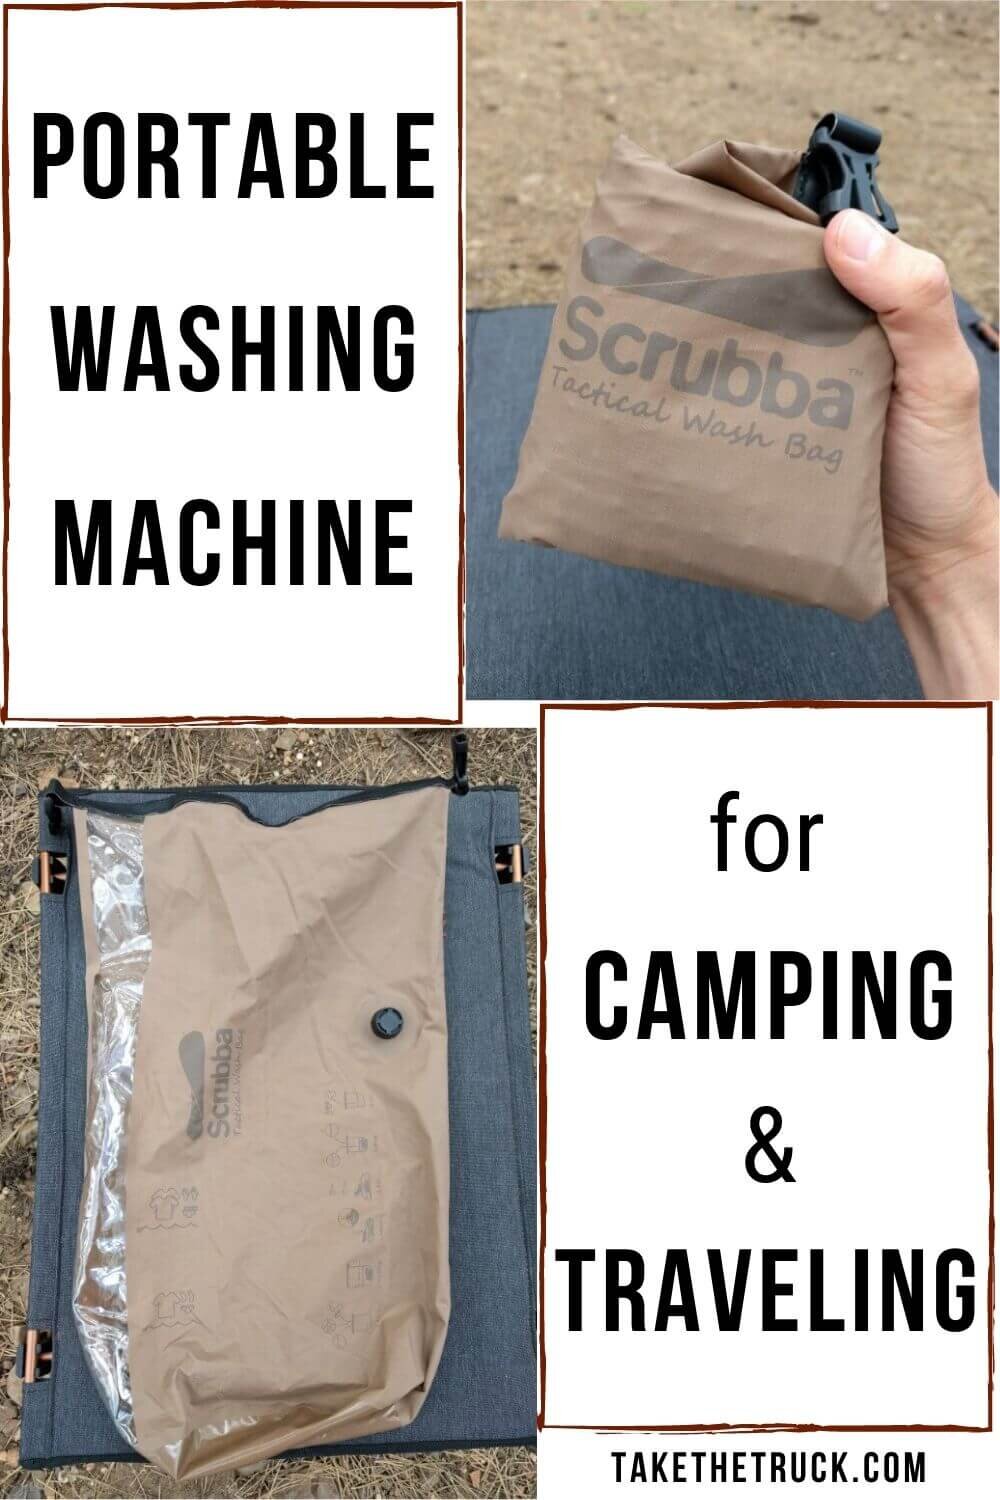 Want to know how to do laundry with very little water while camping or traveling? This camping washing machine - the Scrubba Wash Bag - is great for doing camping laundry or as a travel laundry bag.